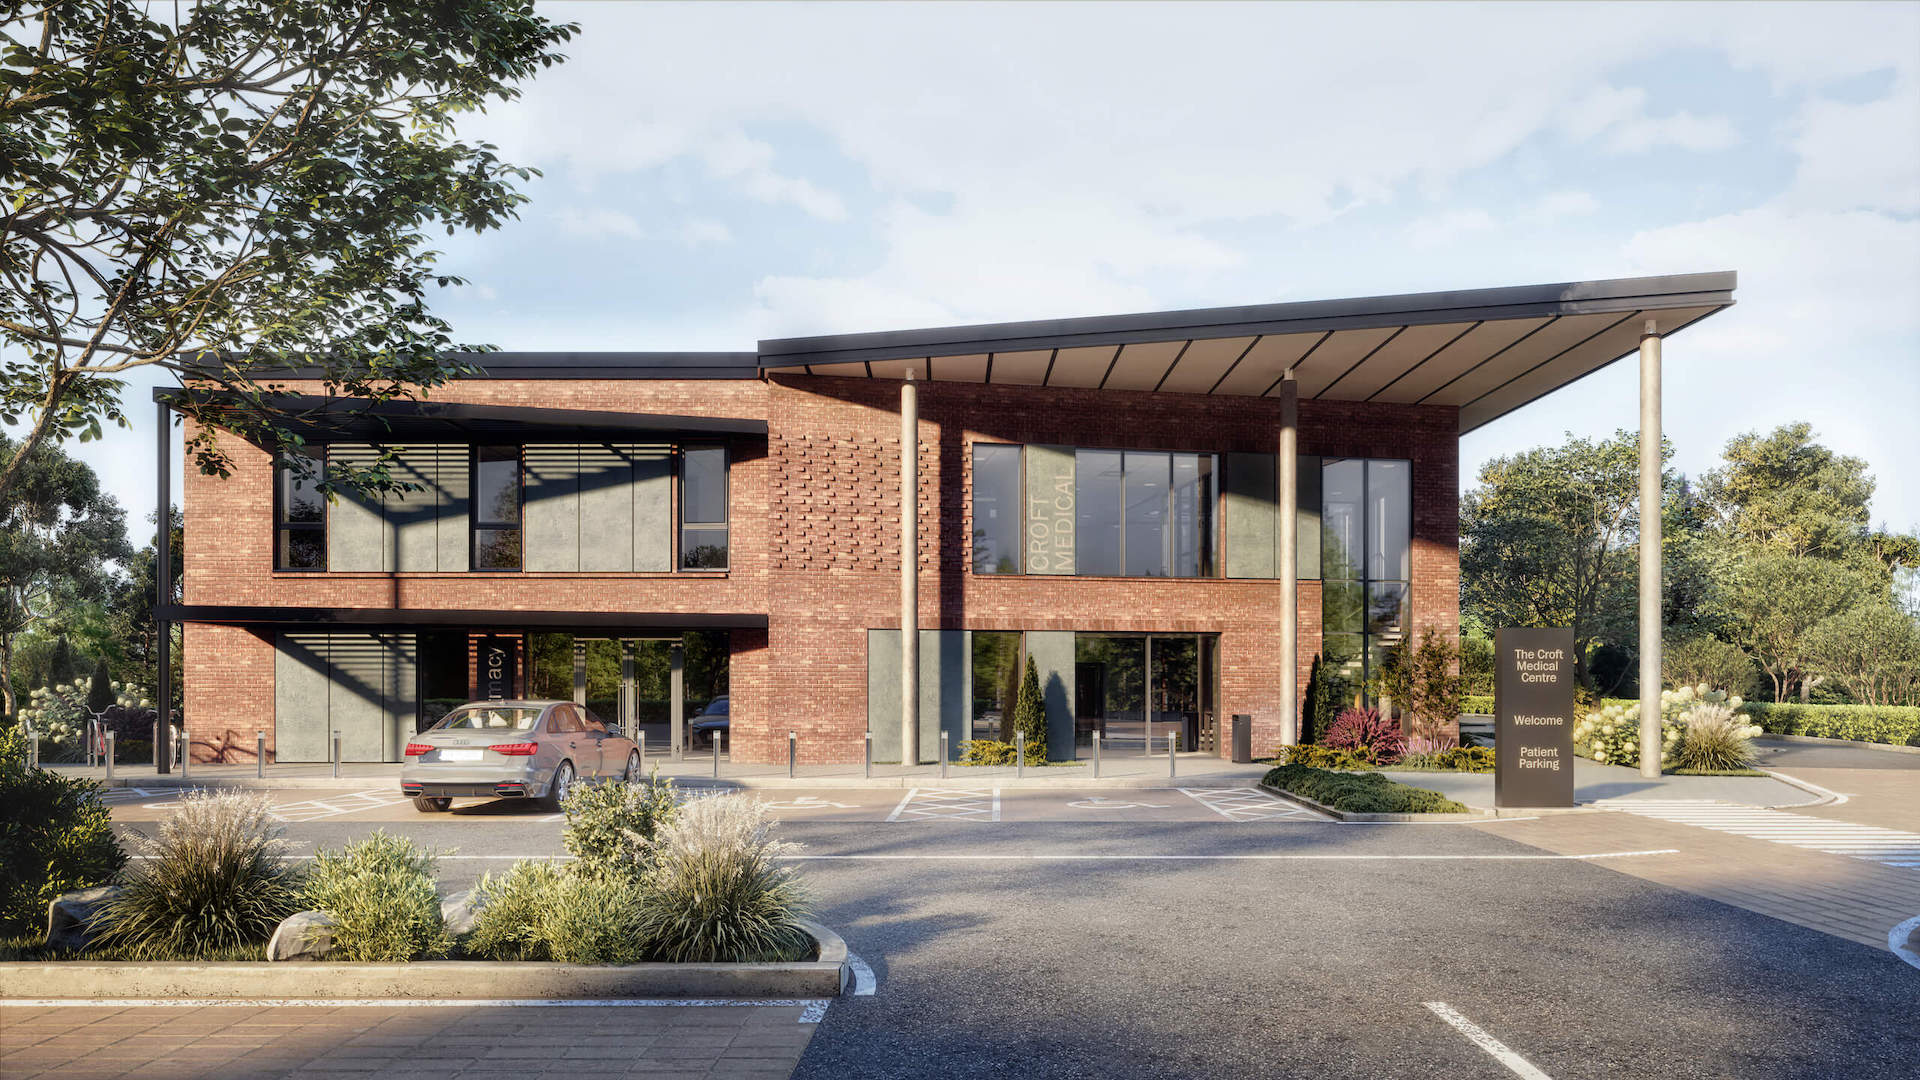 3D Exterior Visualization of a Medical Center in the UK